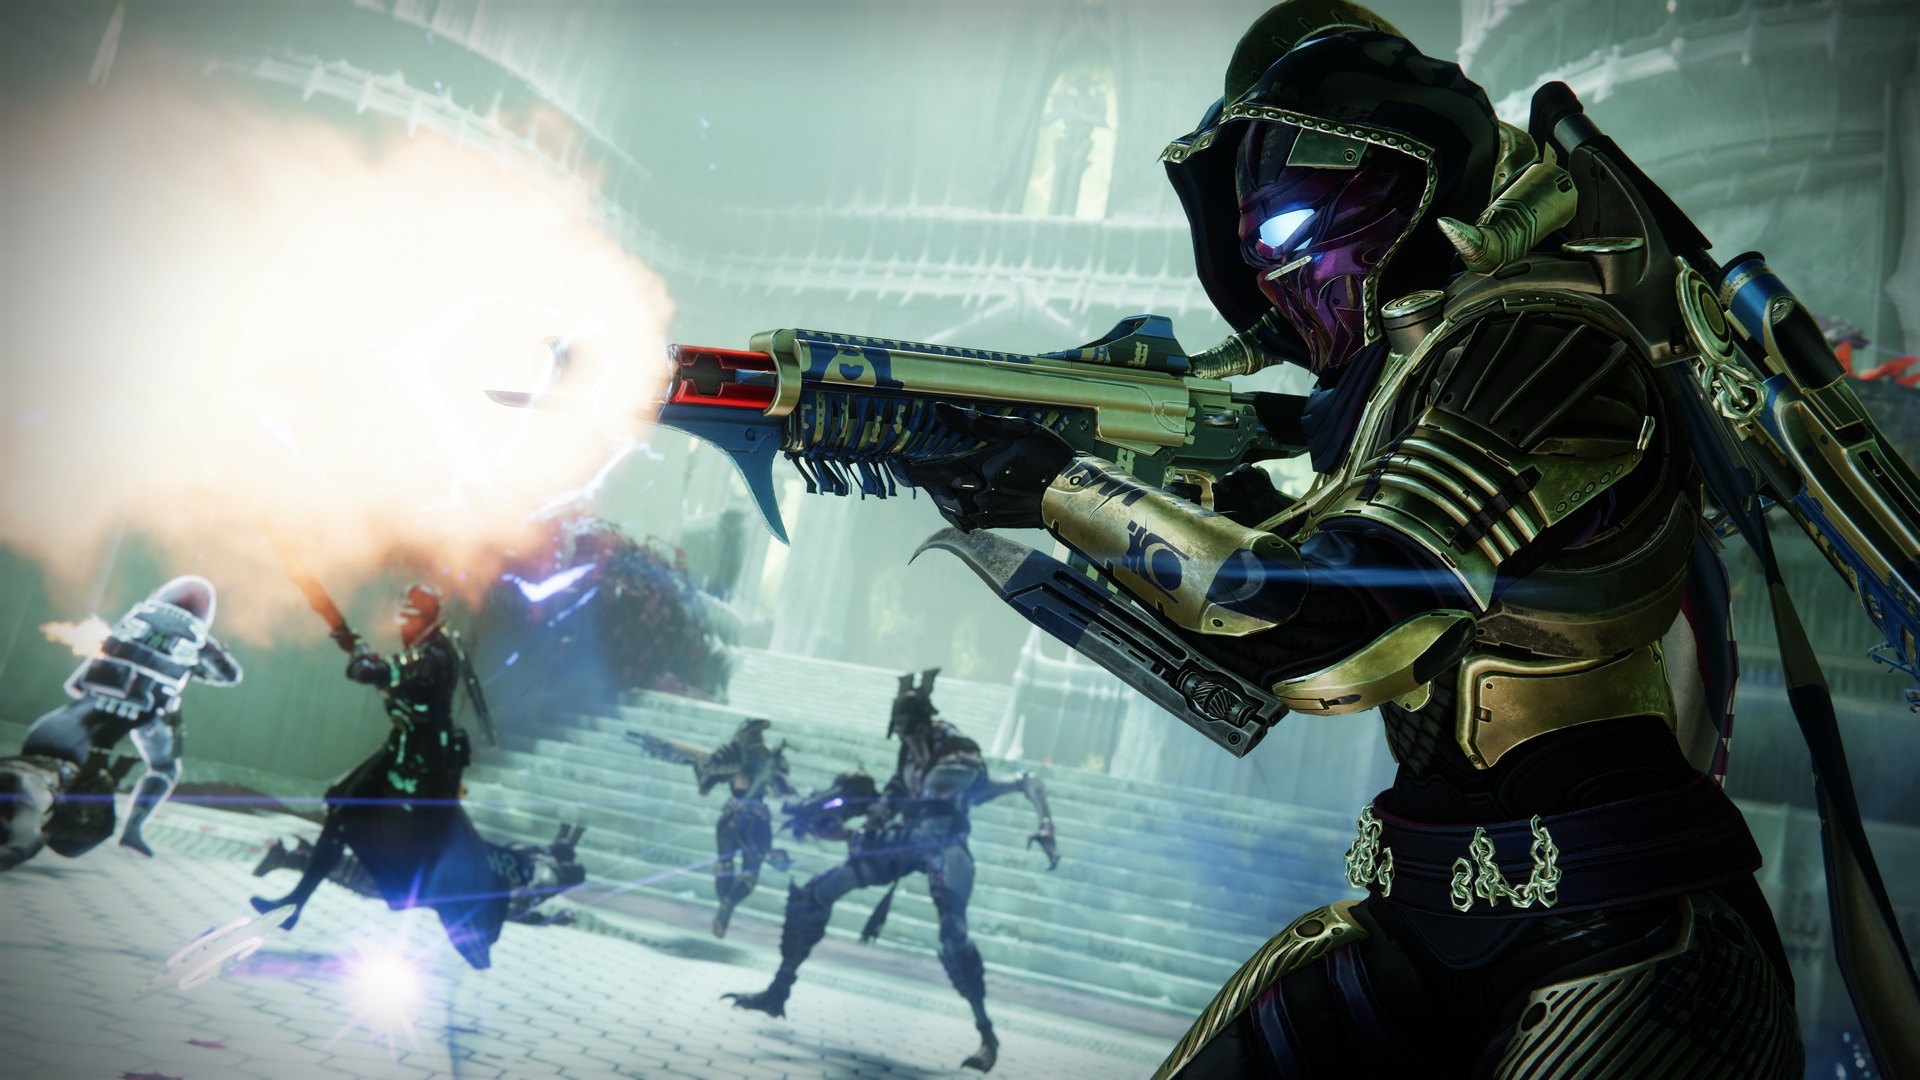 In this guide, we will go over how to get Entombed Emblem Destiny 2, starting from which challenges you must complete to where to redeem it from.